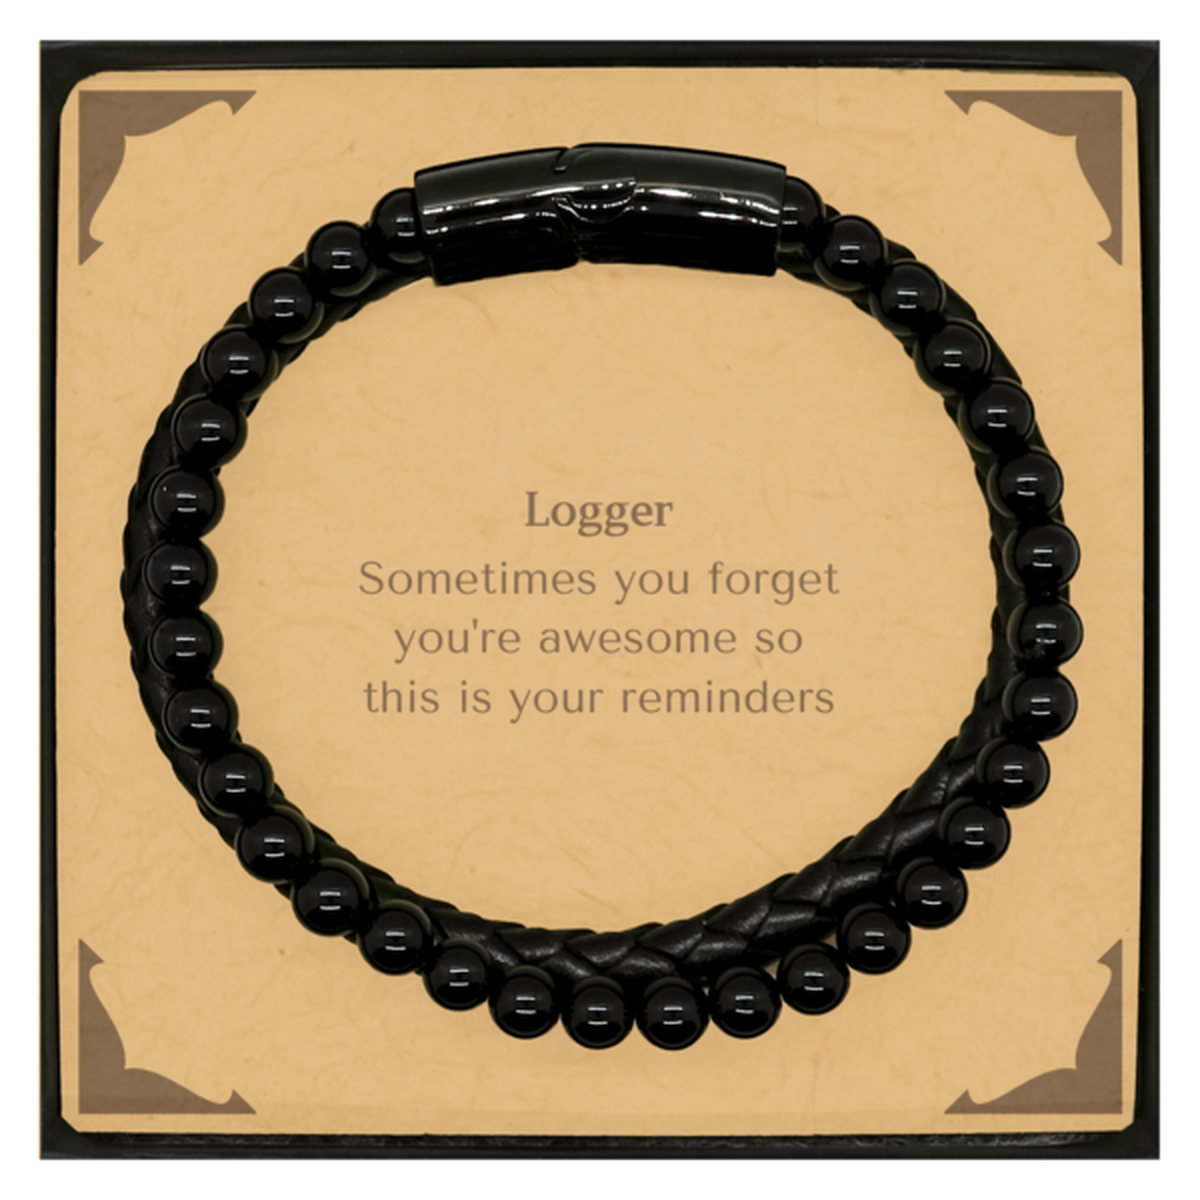 Sentimental Logger Stone Leather Bracelets, Logger Sometimes you forget you're awesome so this is your reminders, Graduation Christmas Birthday Gifts for Logger, Men, Women, Coworkers